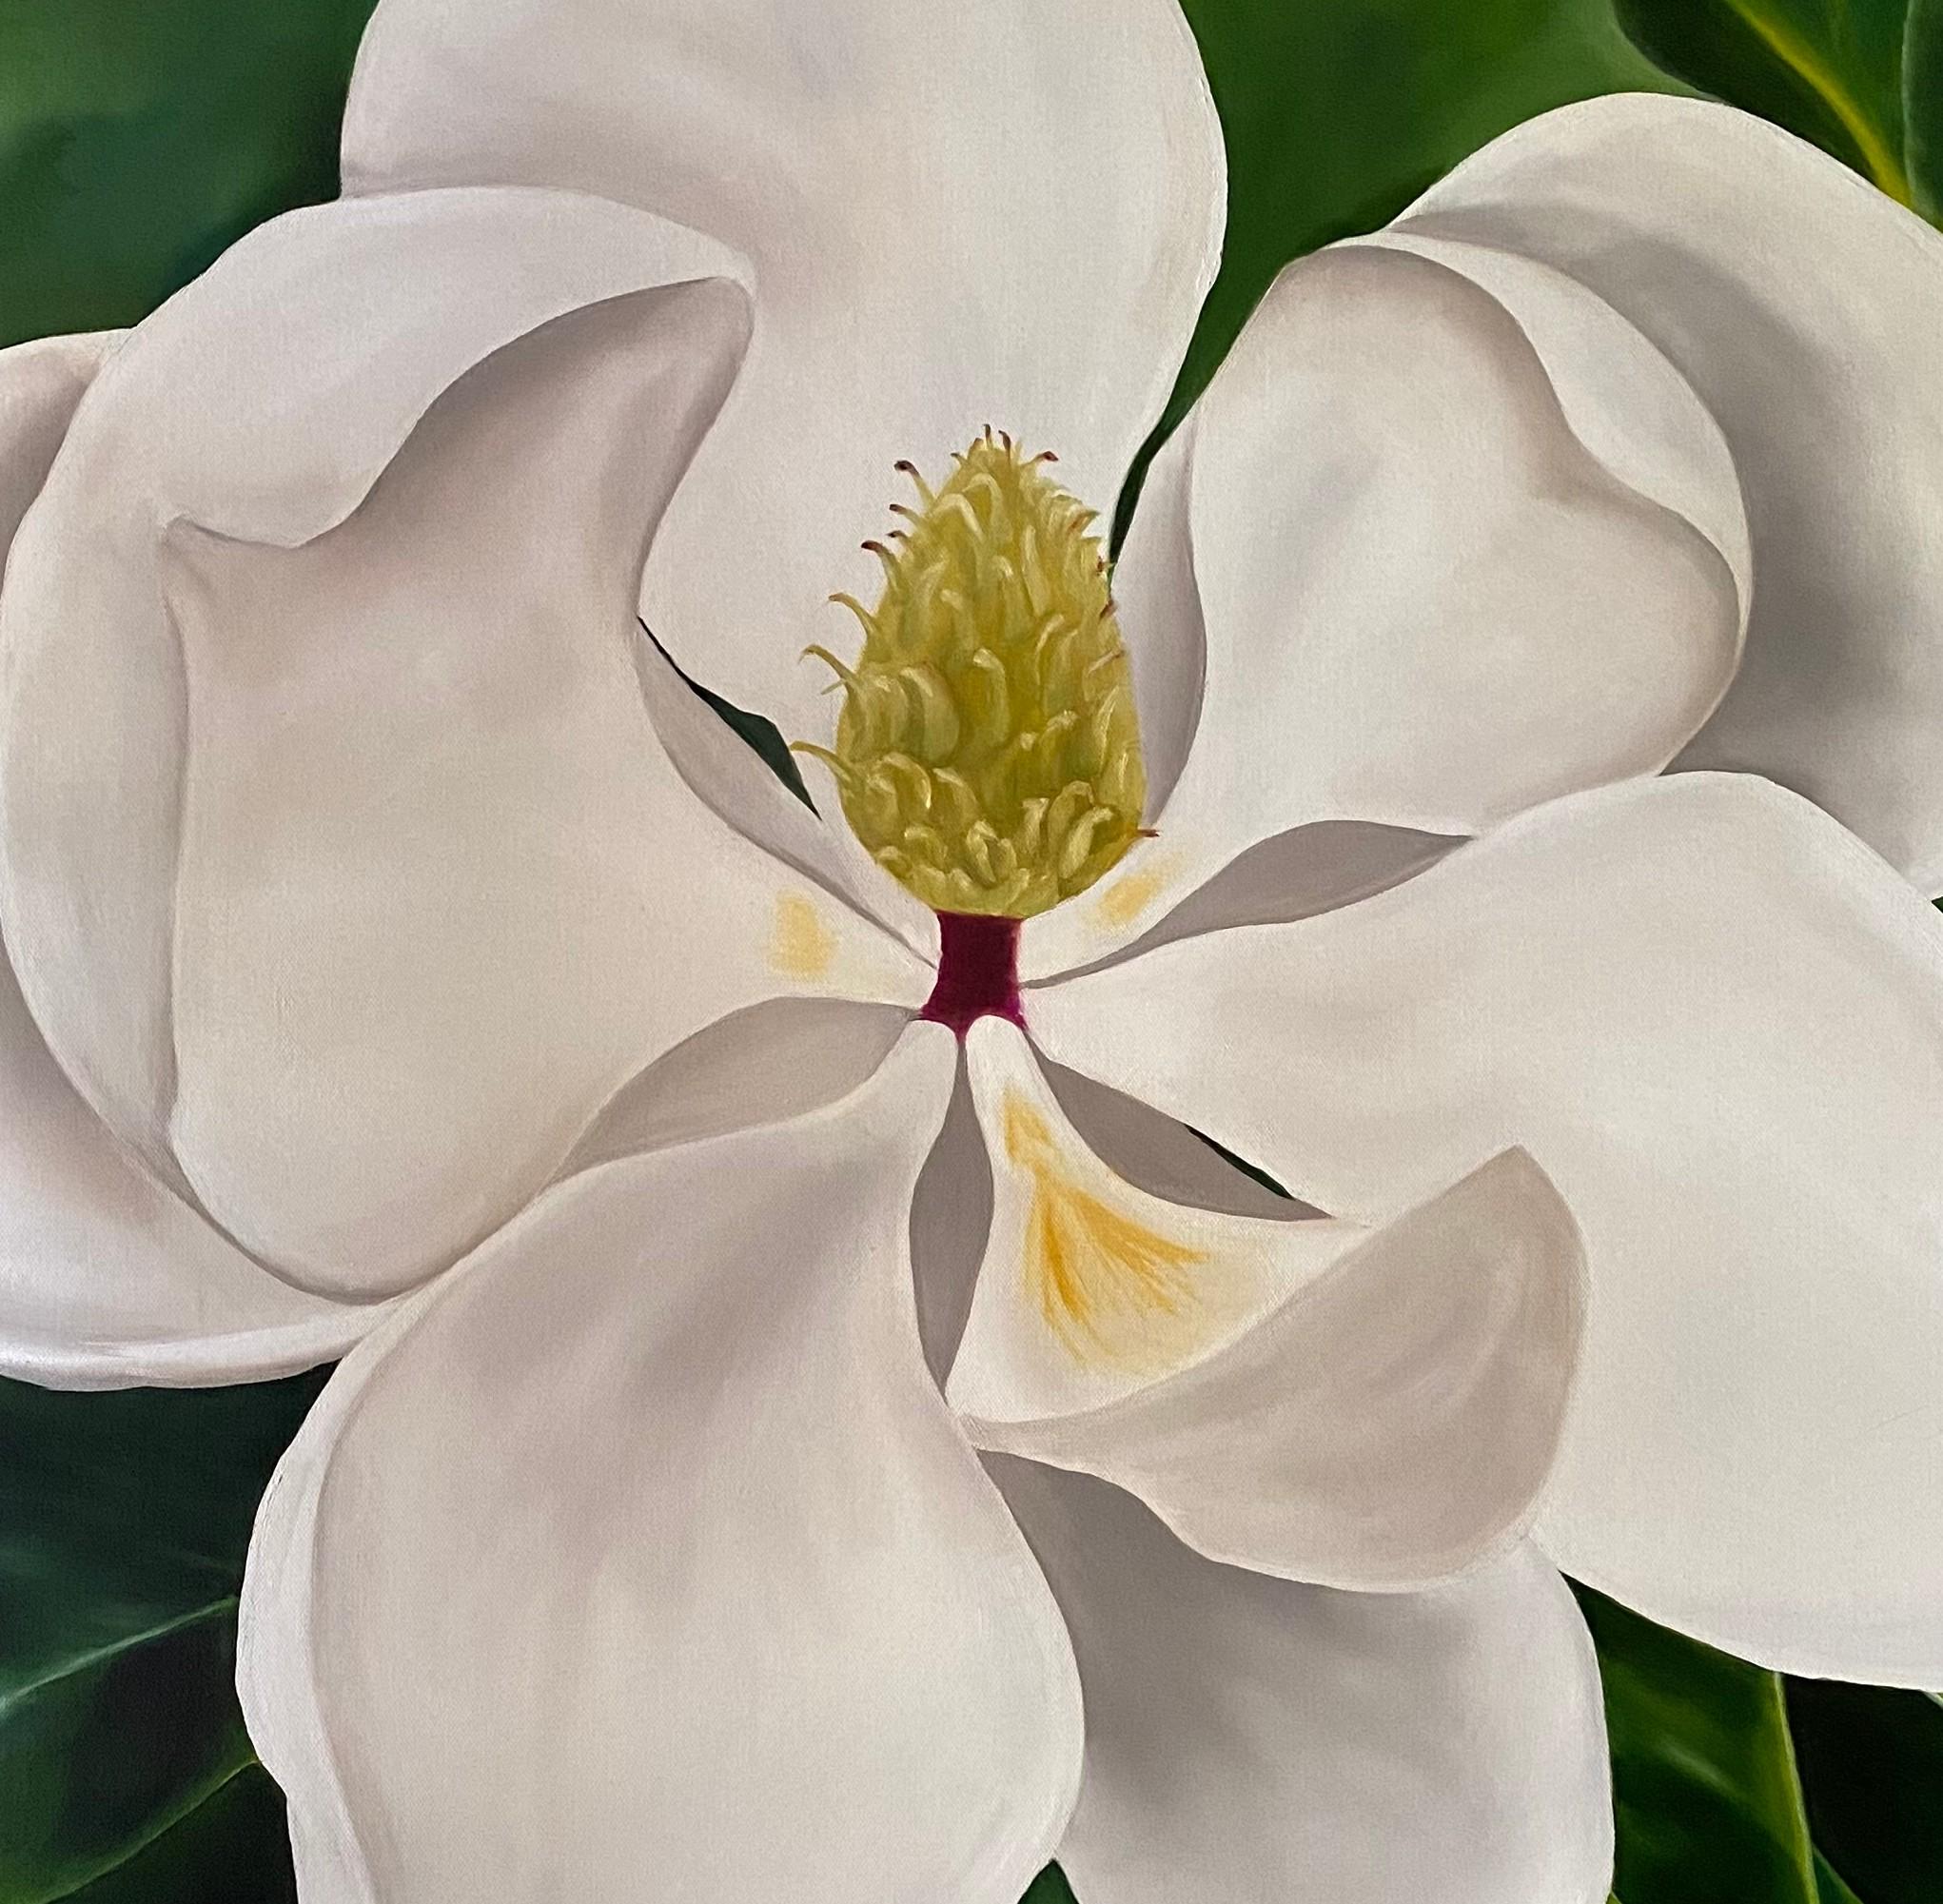  Giant Magnolia  Realism 36 x 36 Oil on Canvas Gallery Wrapped   Floral - Painting by Susan Meeks